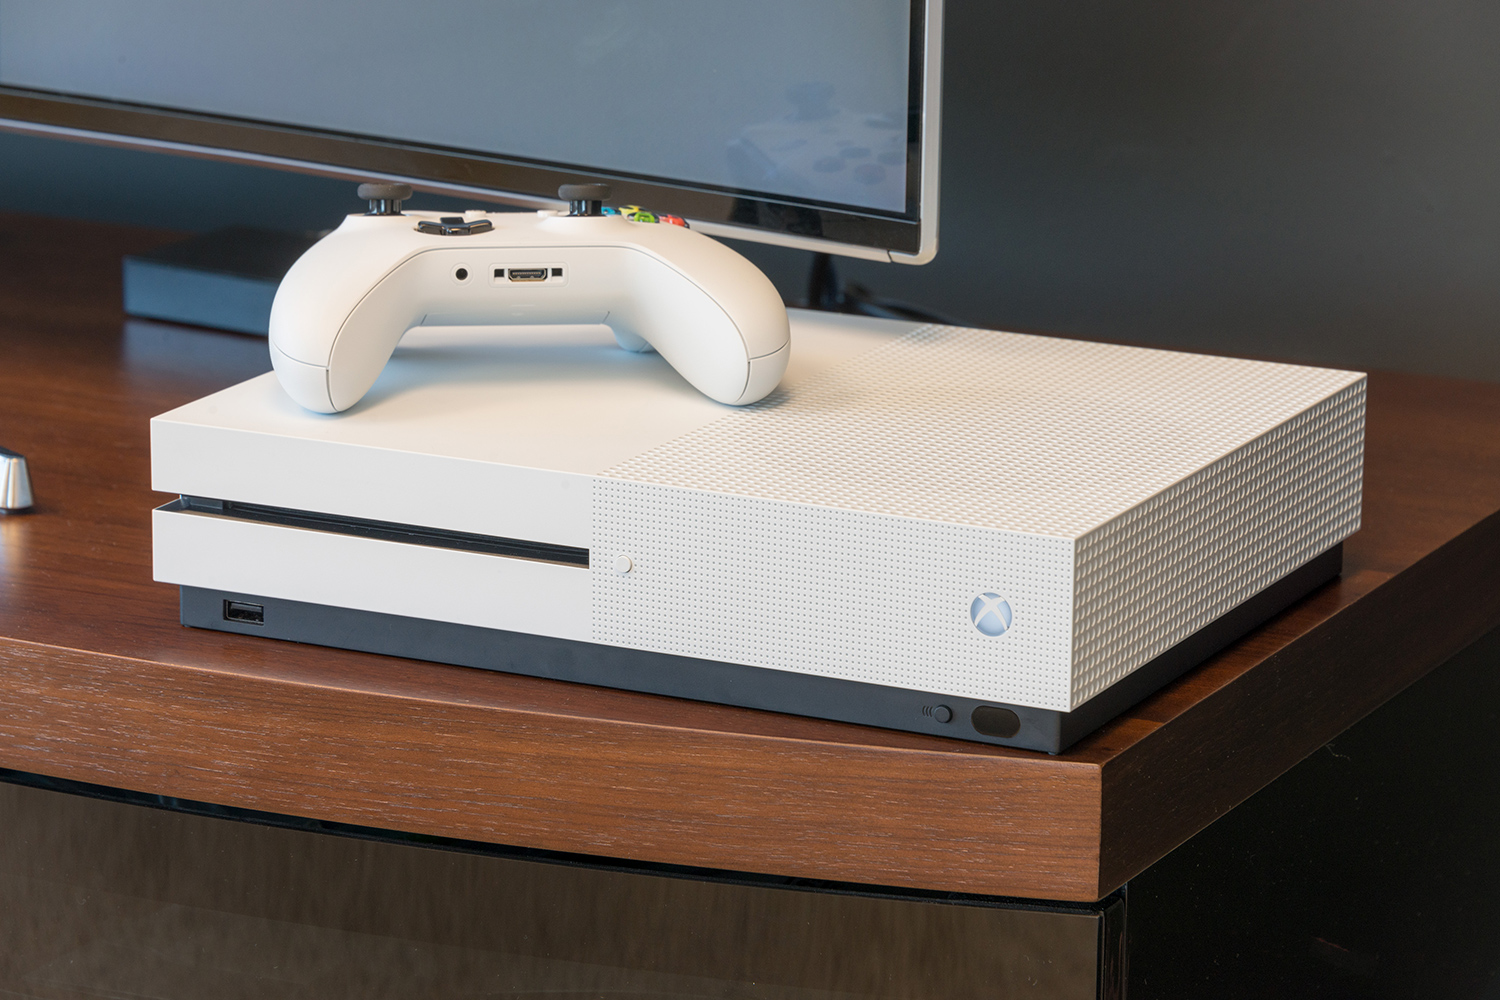 Xbox One S All-Digital Console: What Are Microsoft Thinking